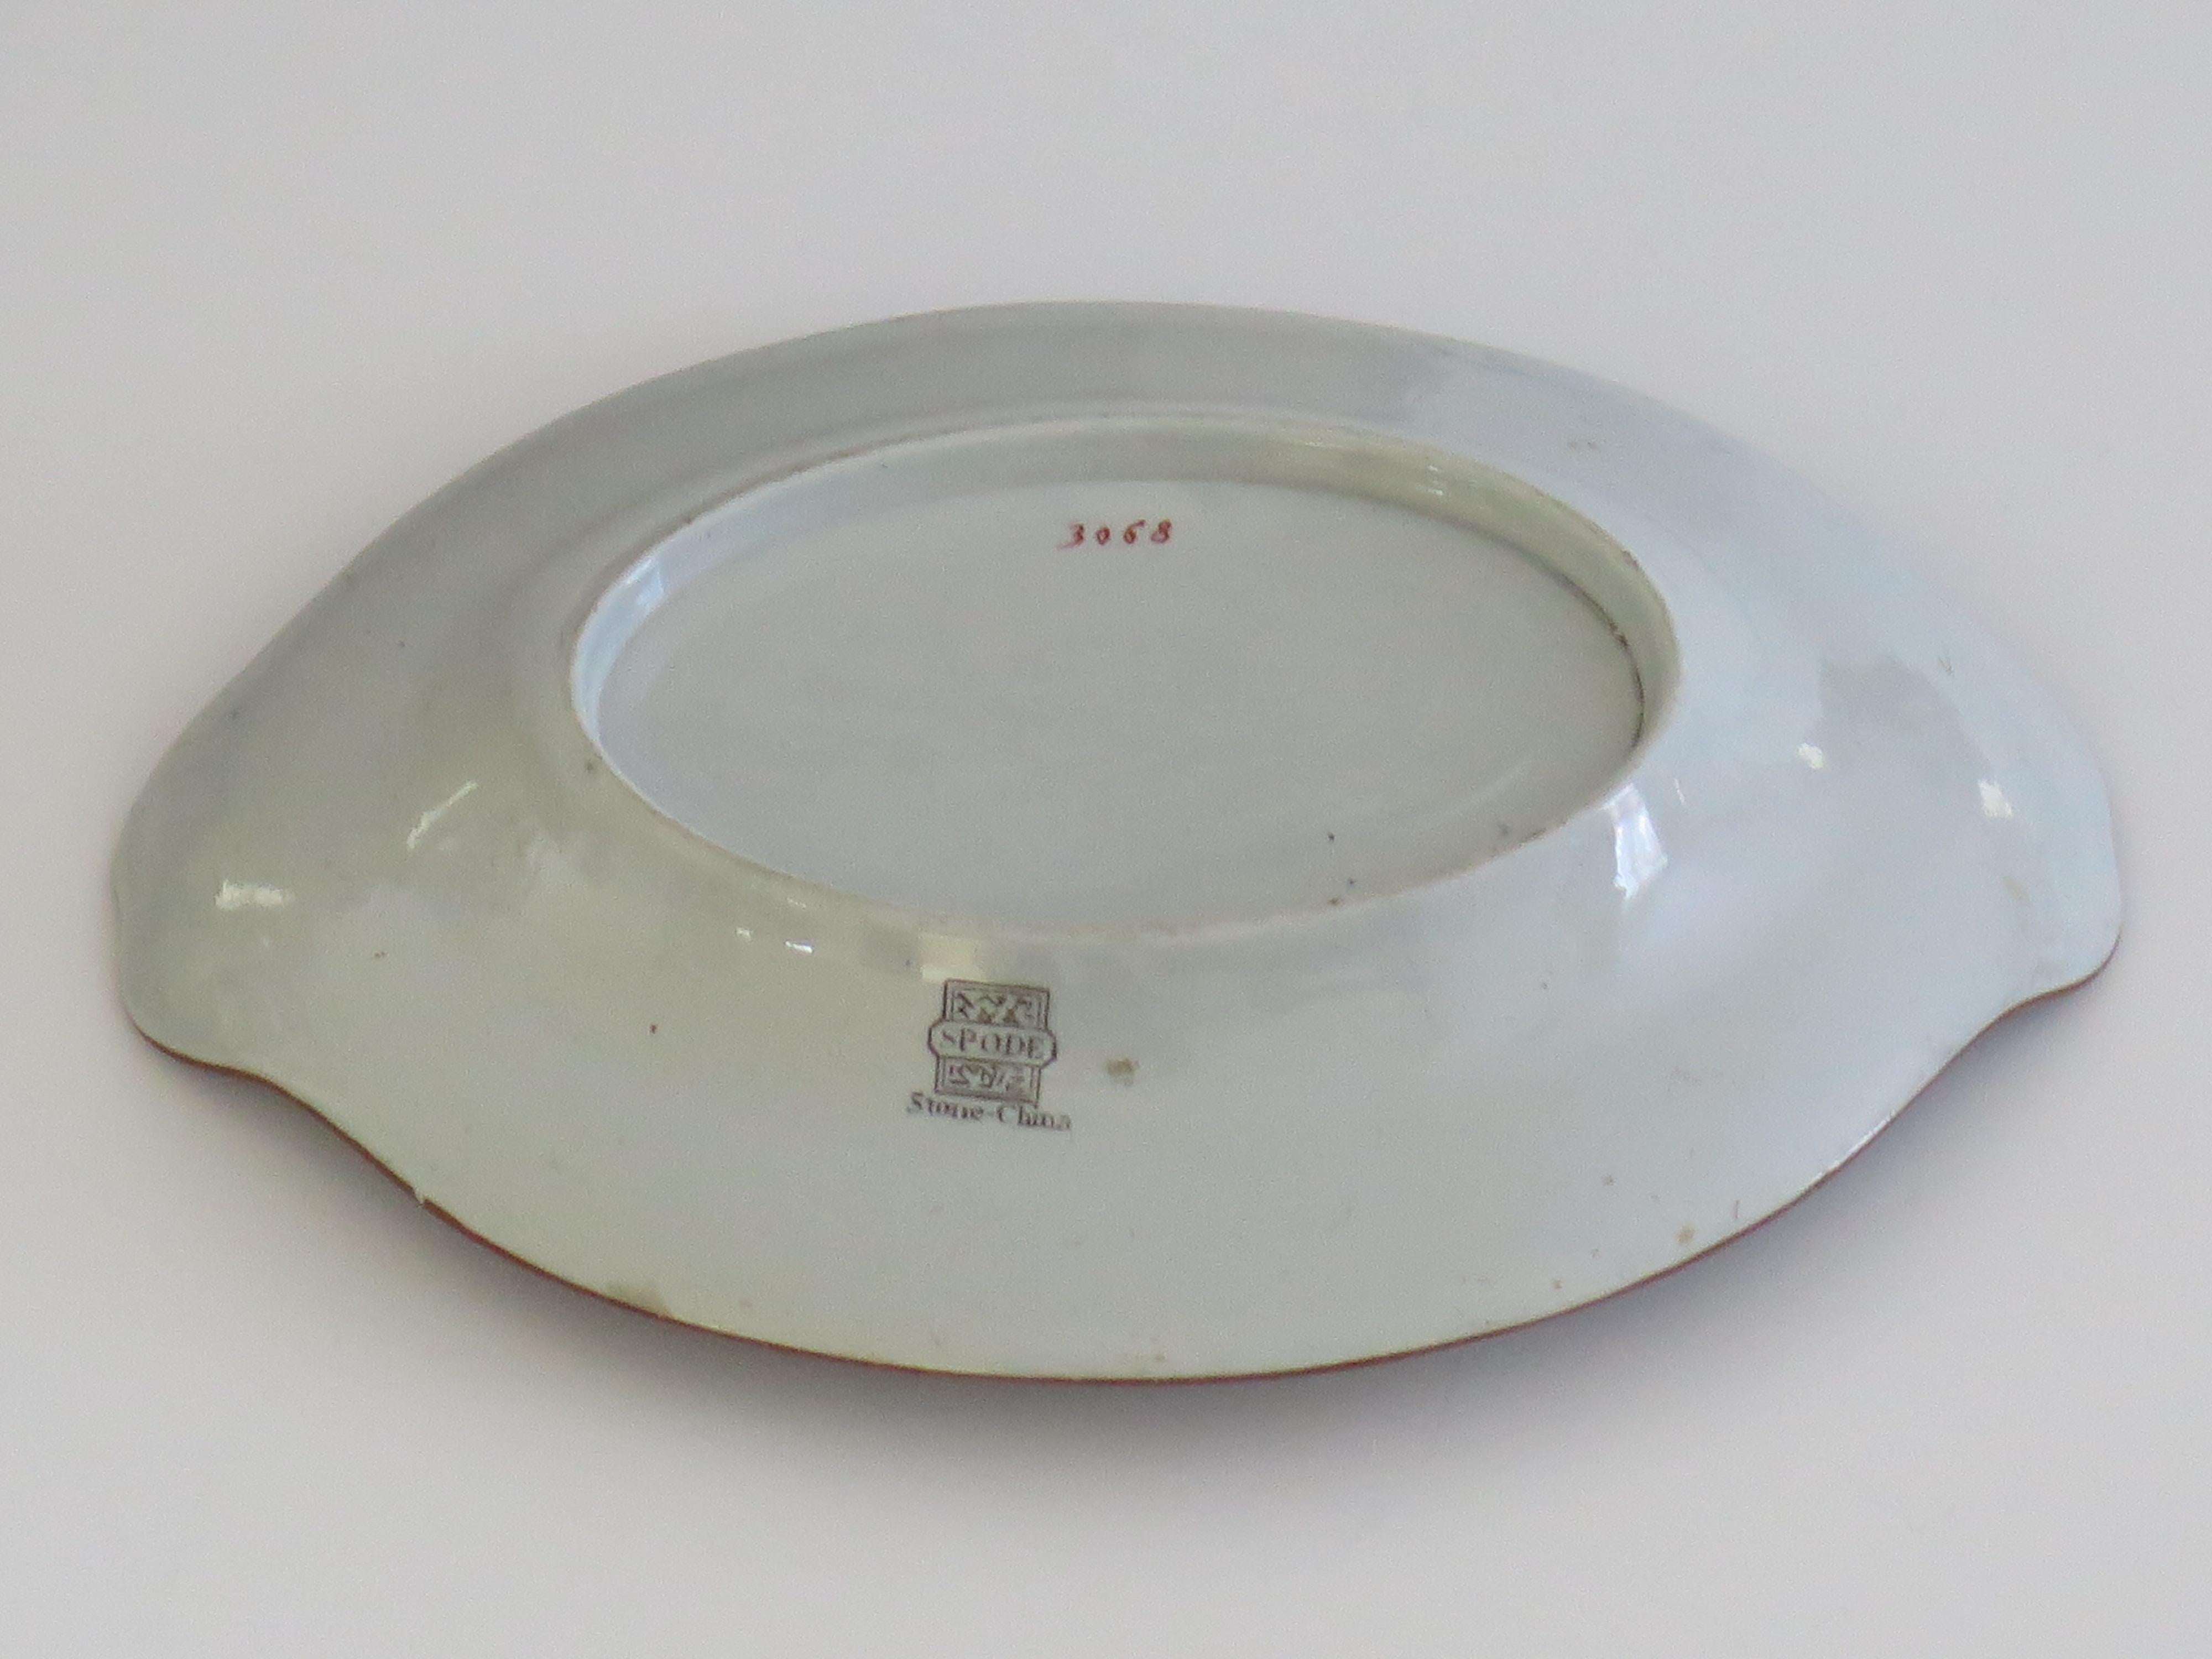 Spode Stone China Small Serving Dish in Ship Pattern 3068, circa 1810 For Sale 1